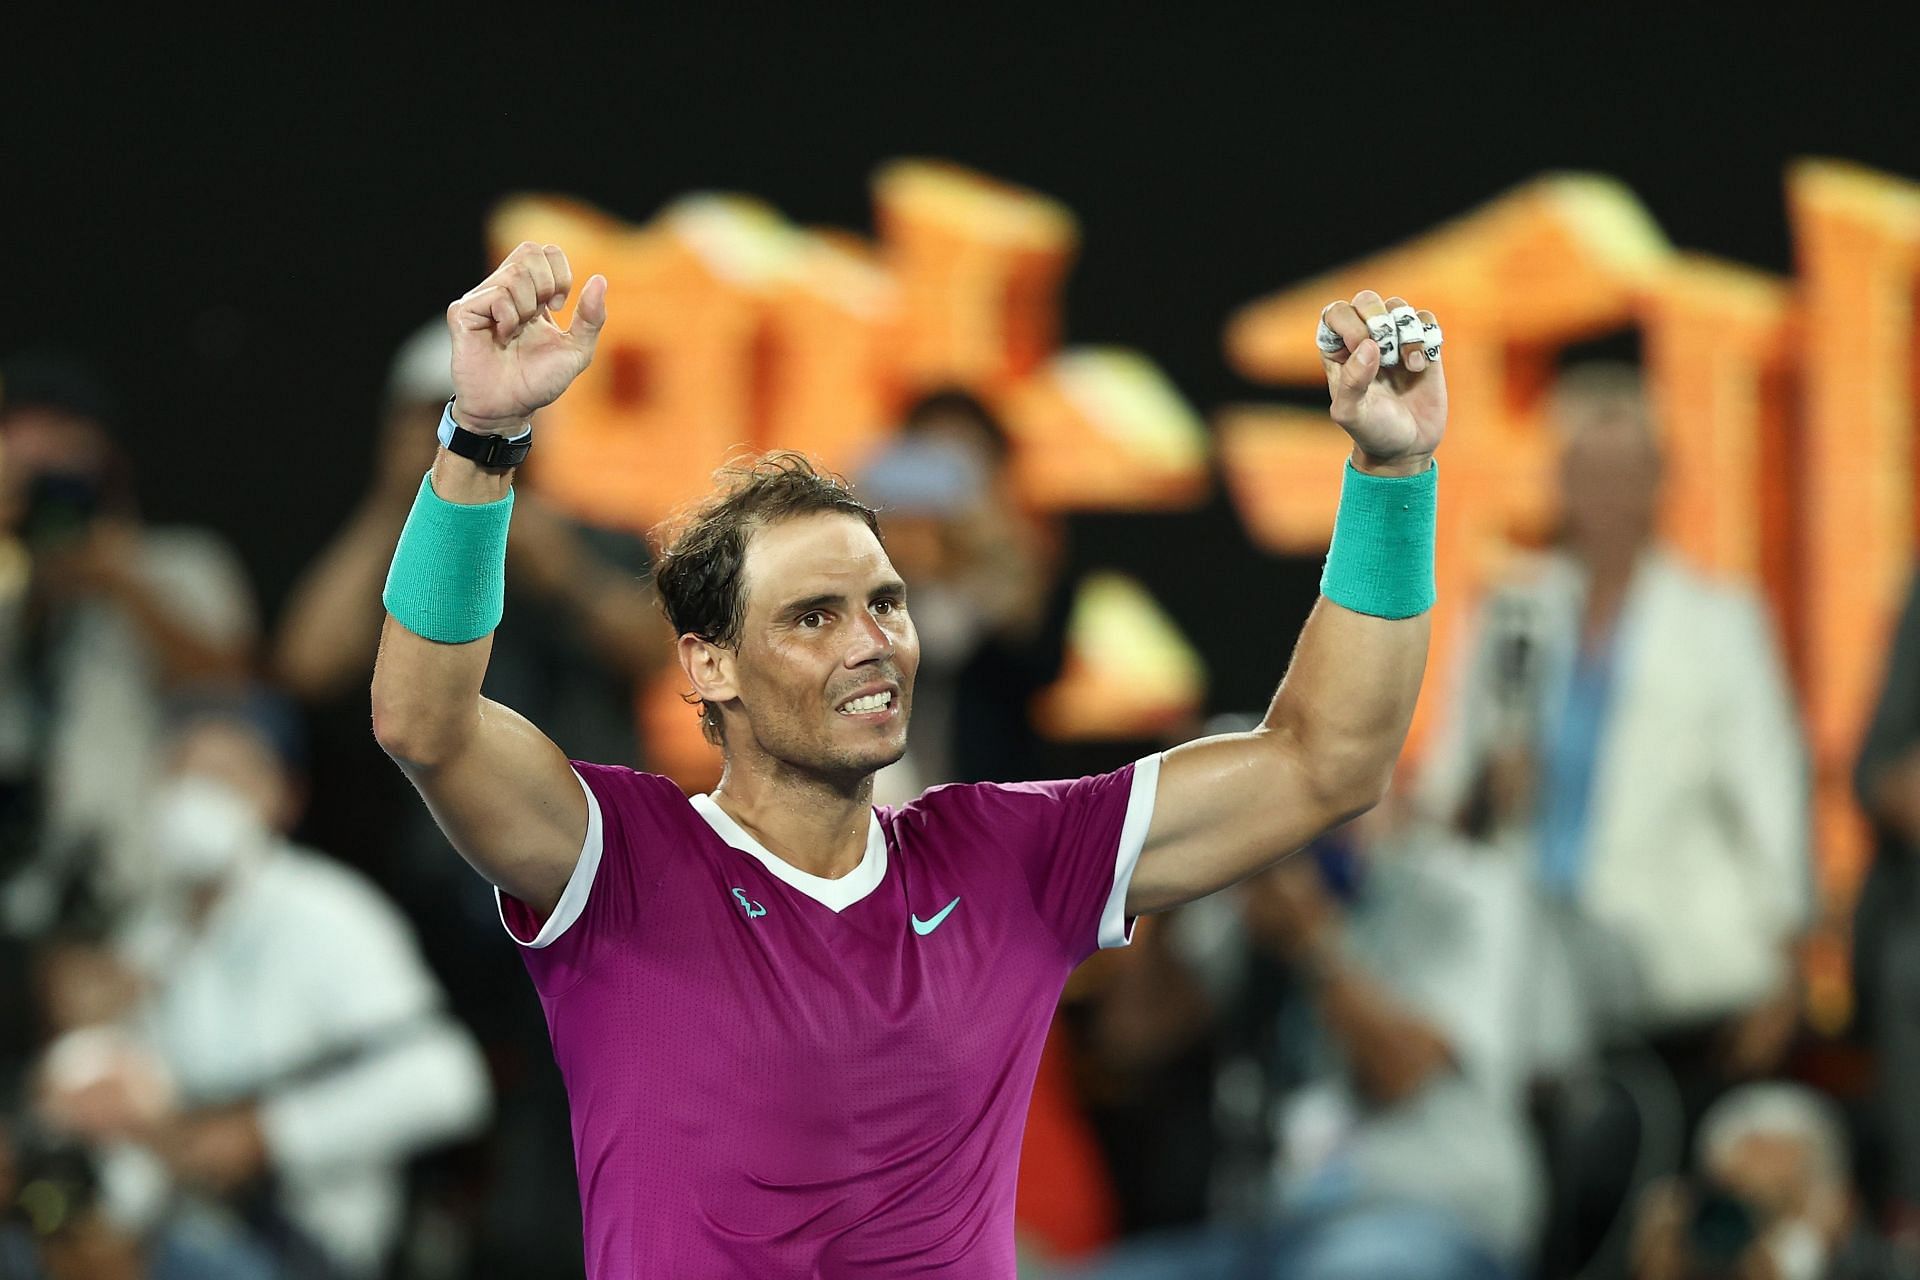 Rafael Nadal reacts after wining his semifinal match at the 2022 Australian Open